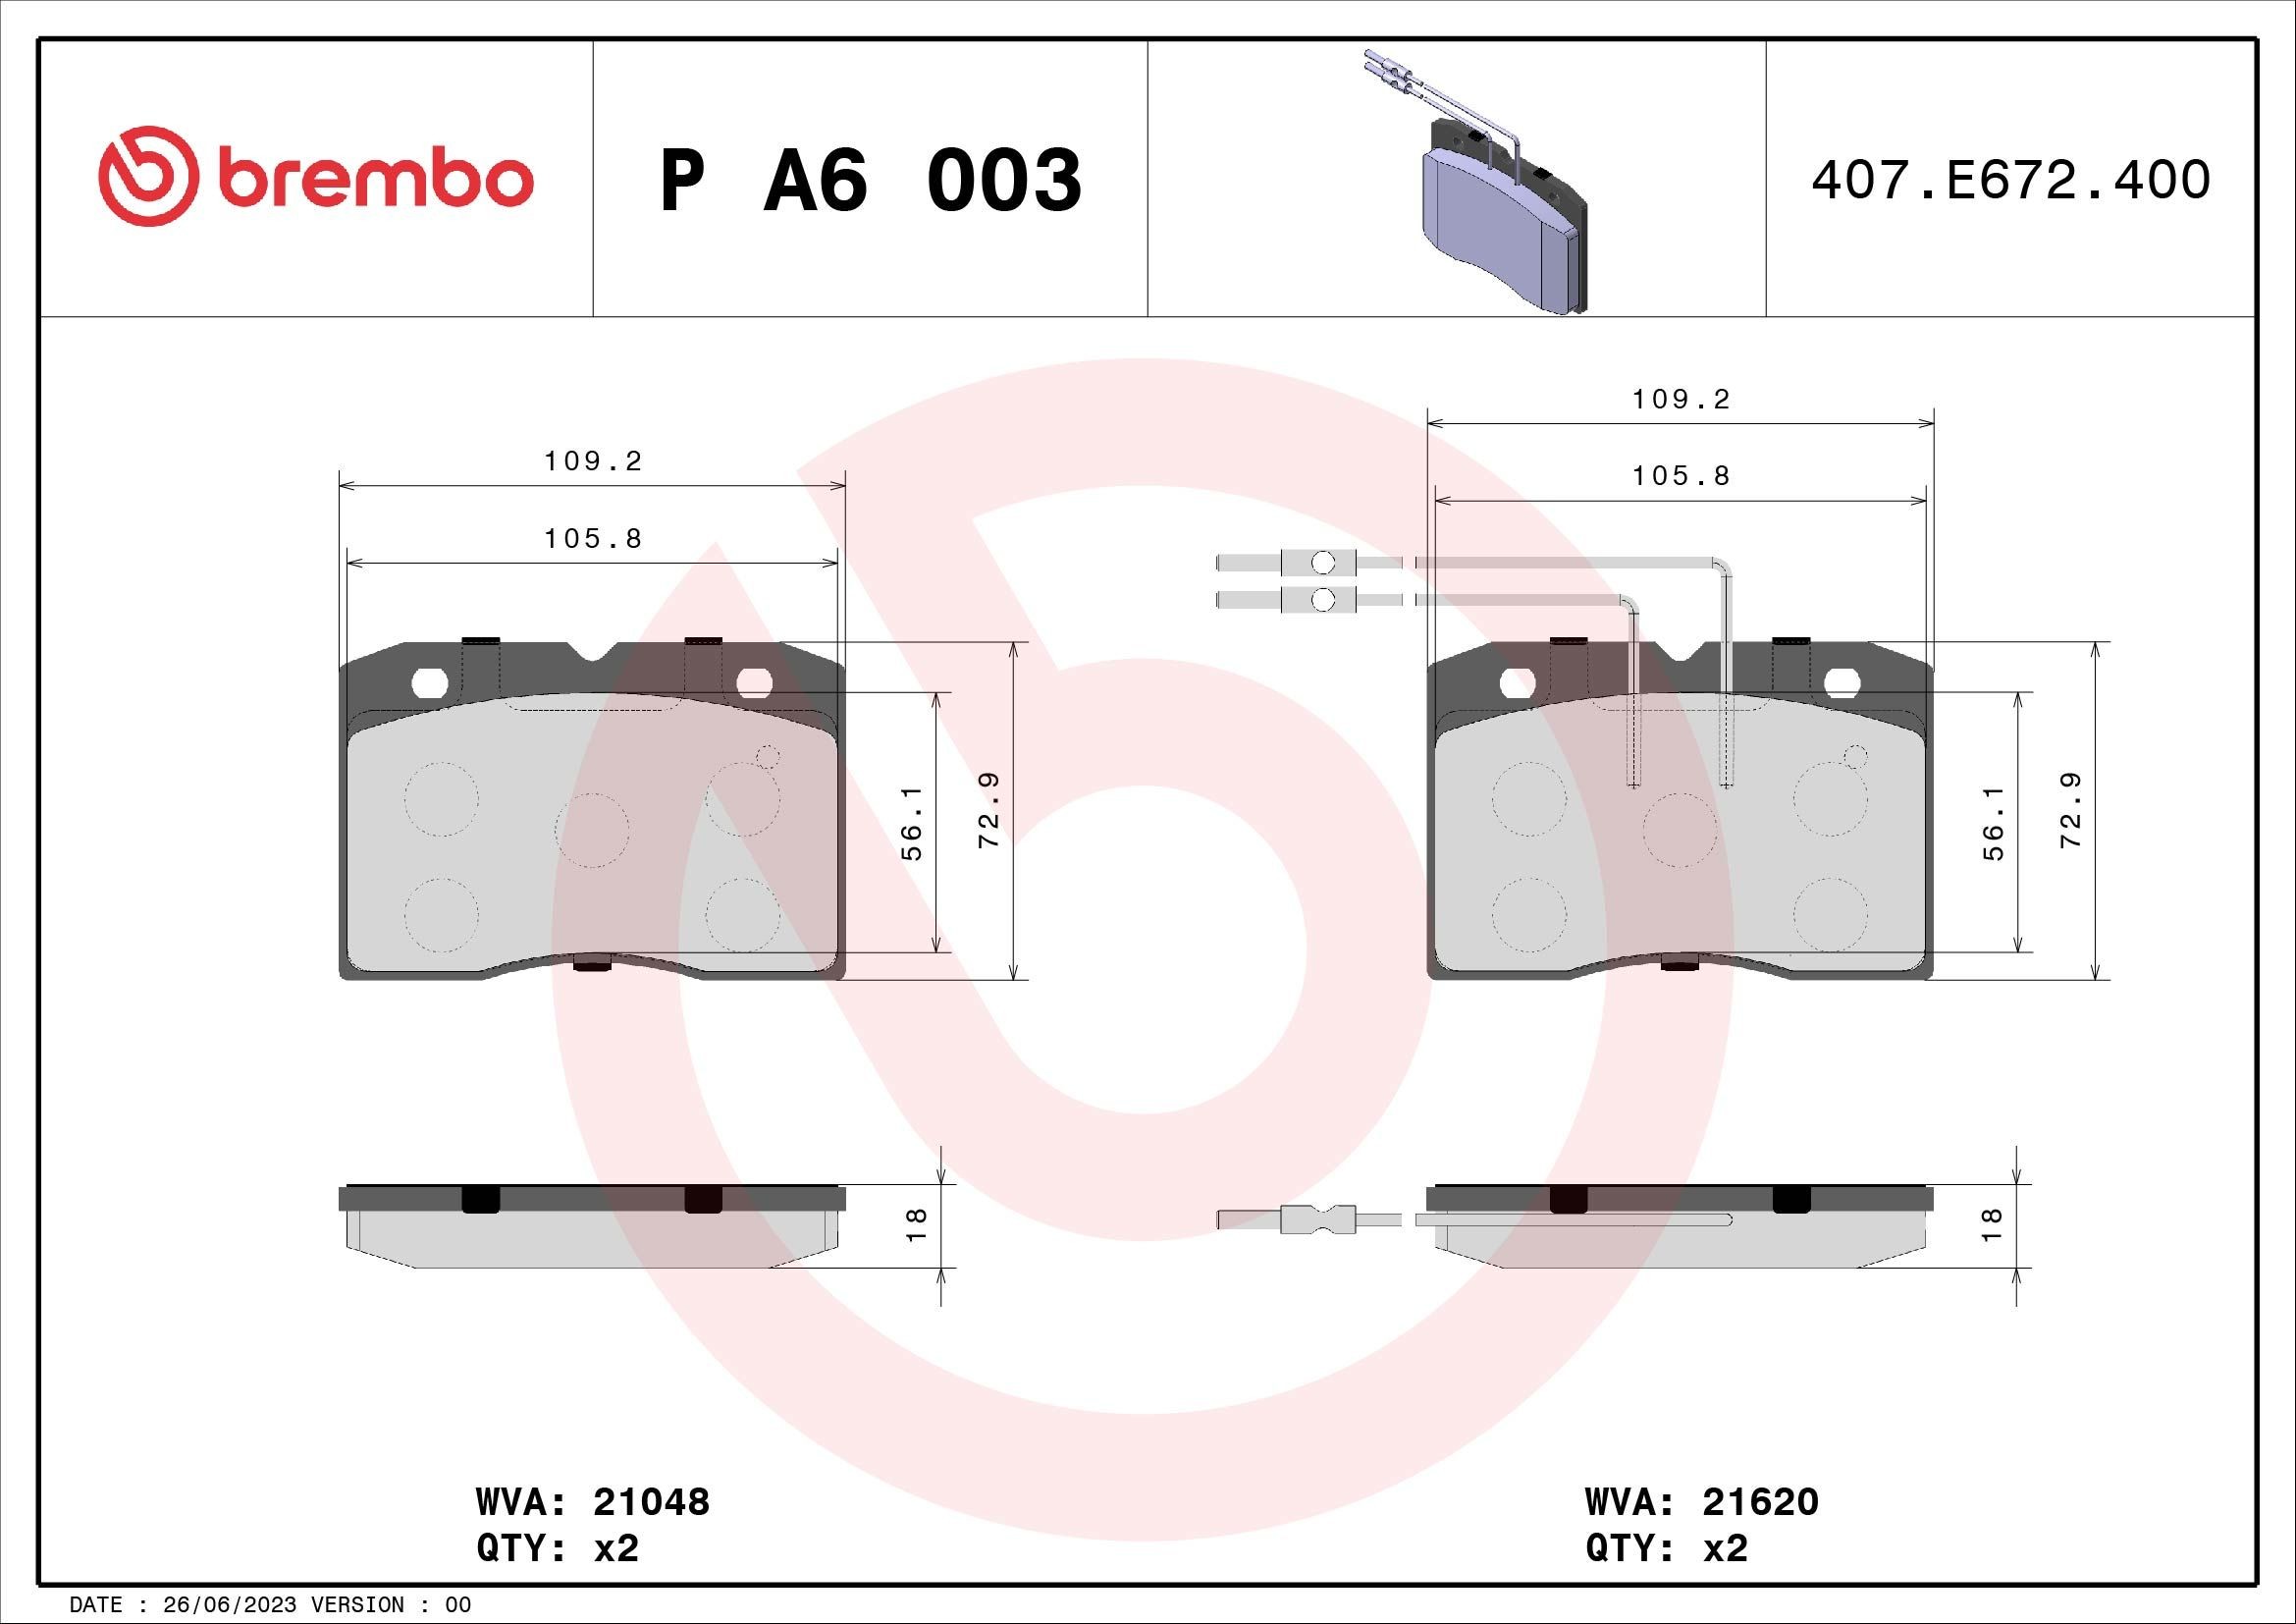 BREMBO P A6 003 Brake pad set incl. wear warning contact, without accessories